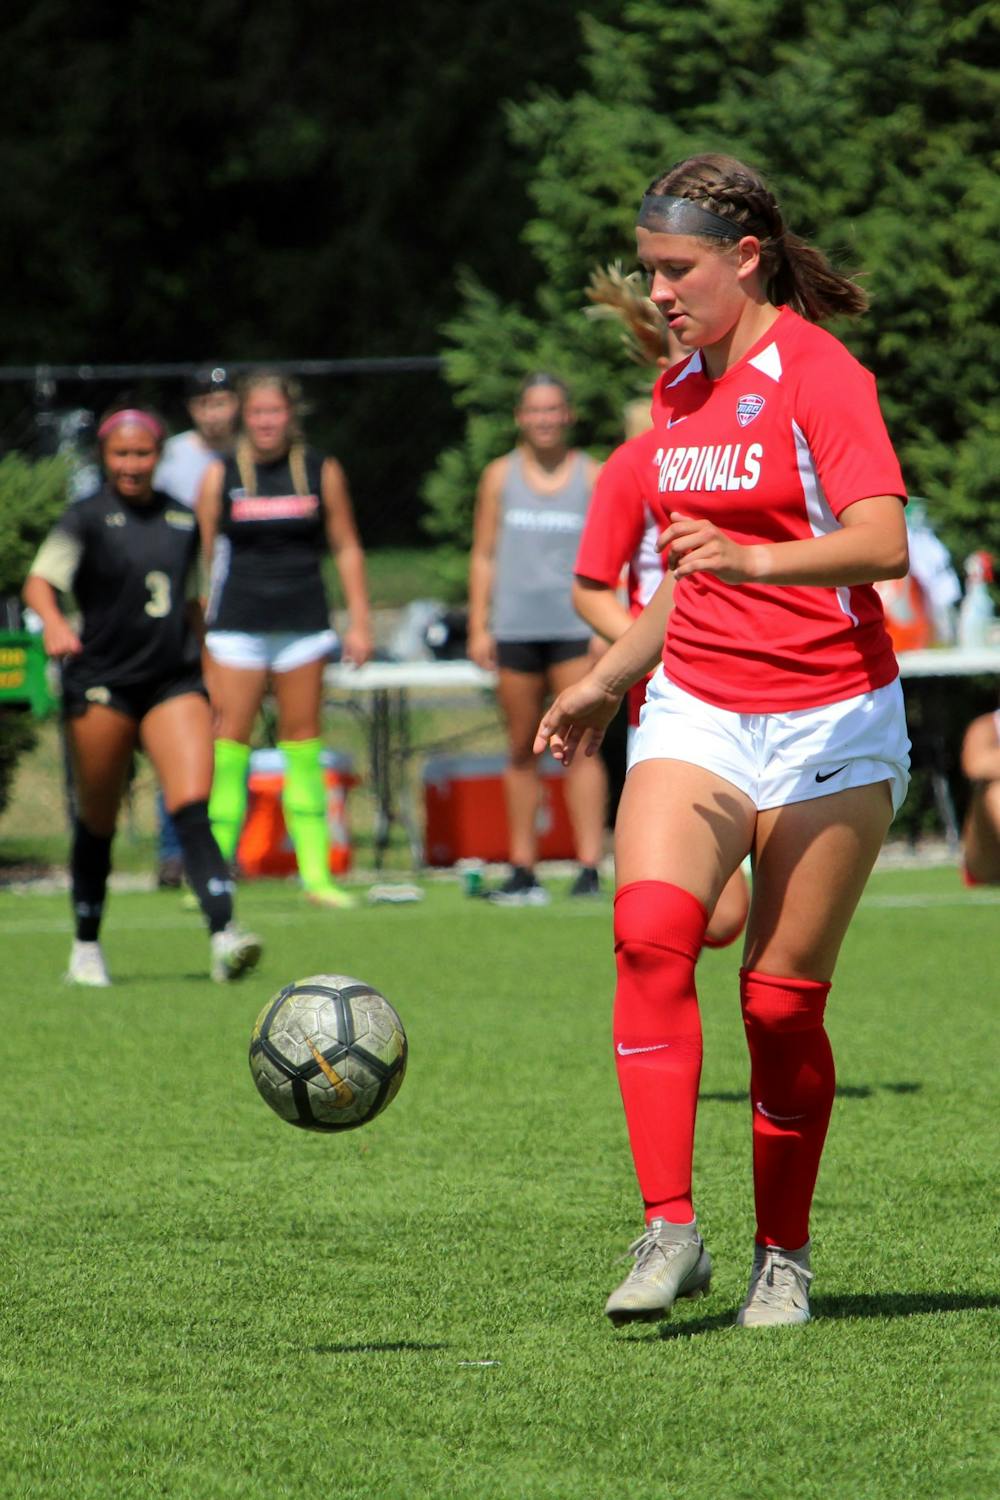 A player for Ball State Soccer goes for the ball in a game against Purdue Fort Wayne, Sunday, Sept. 5, 2021. DN, Amber Pietz